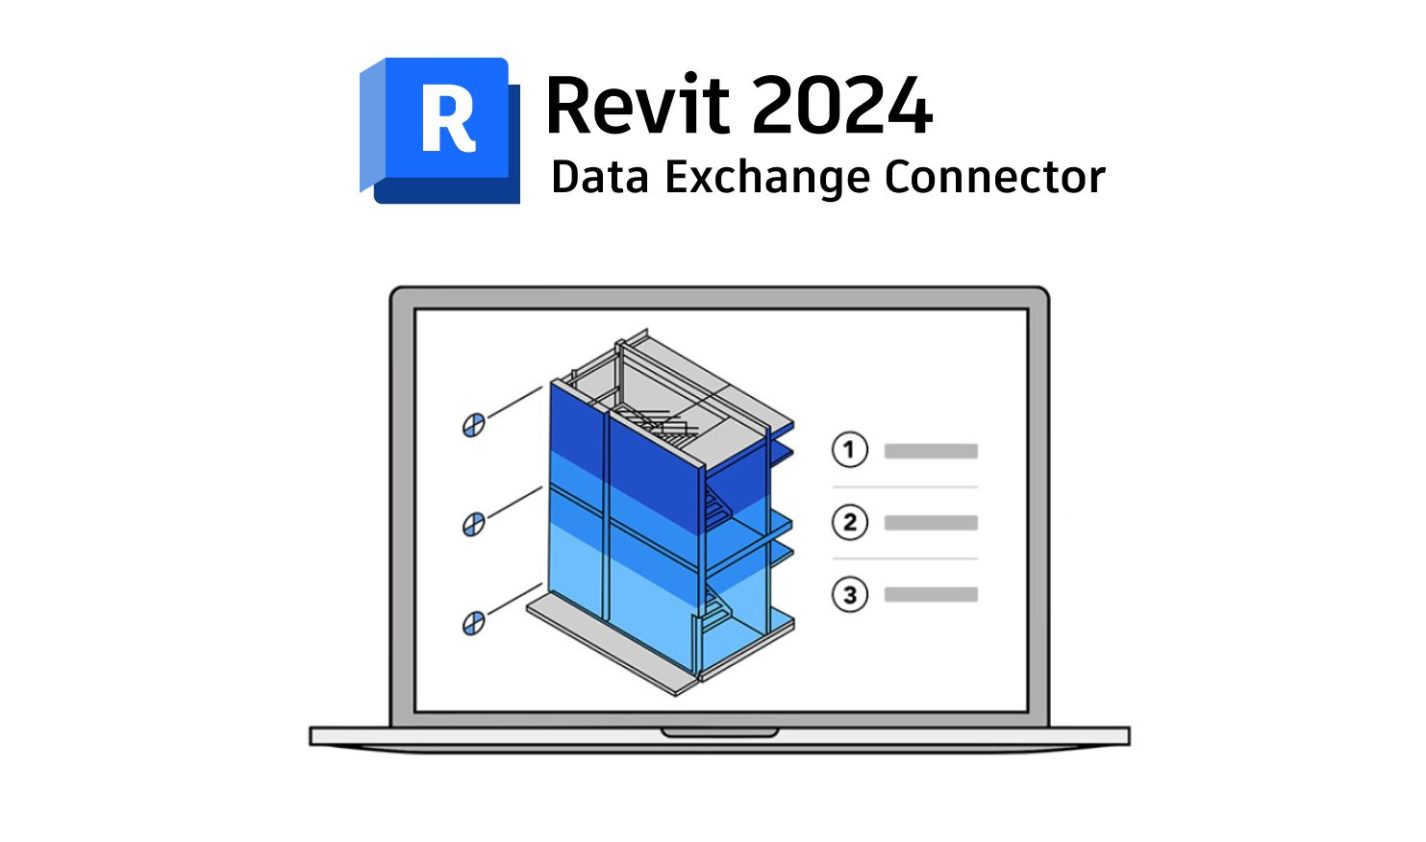 Introducing the Data Exchange Connector for Revit 2024: Streamline Collaboration and Data Sharing